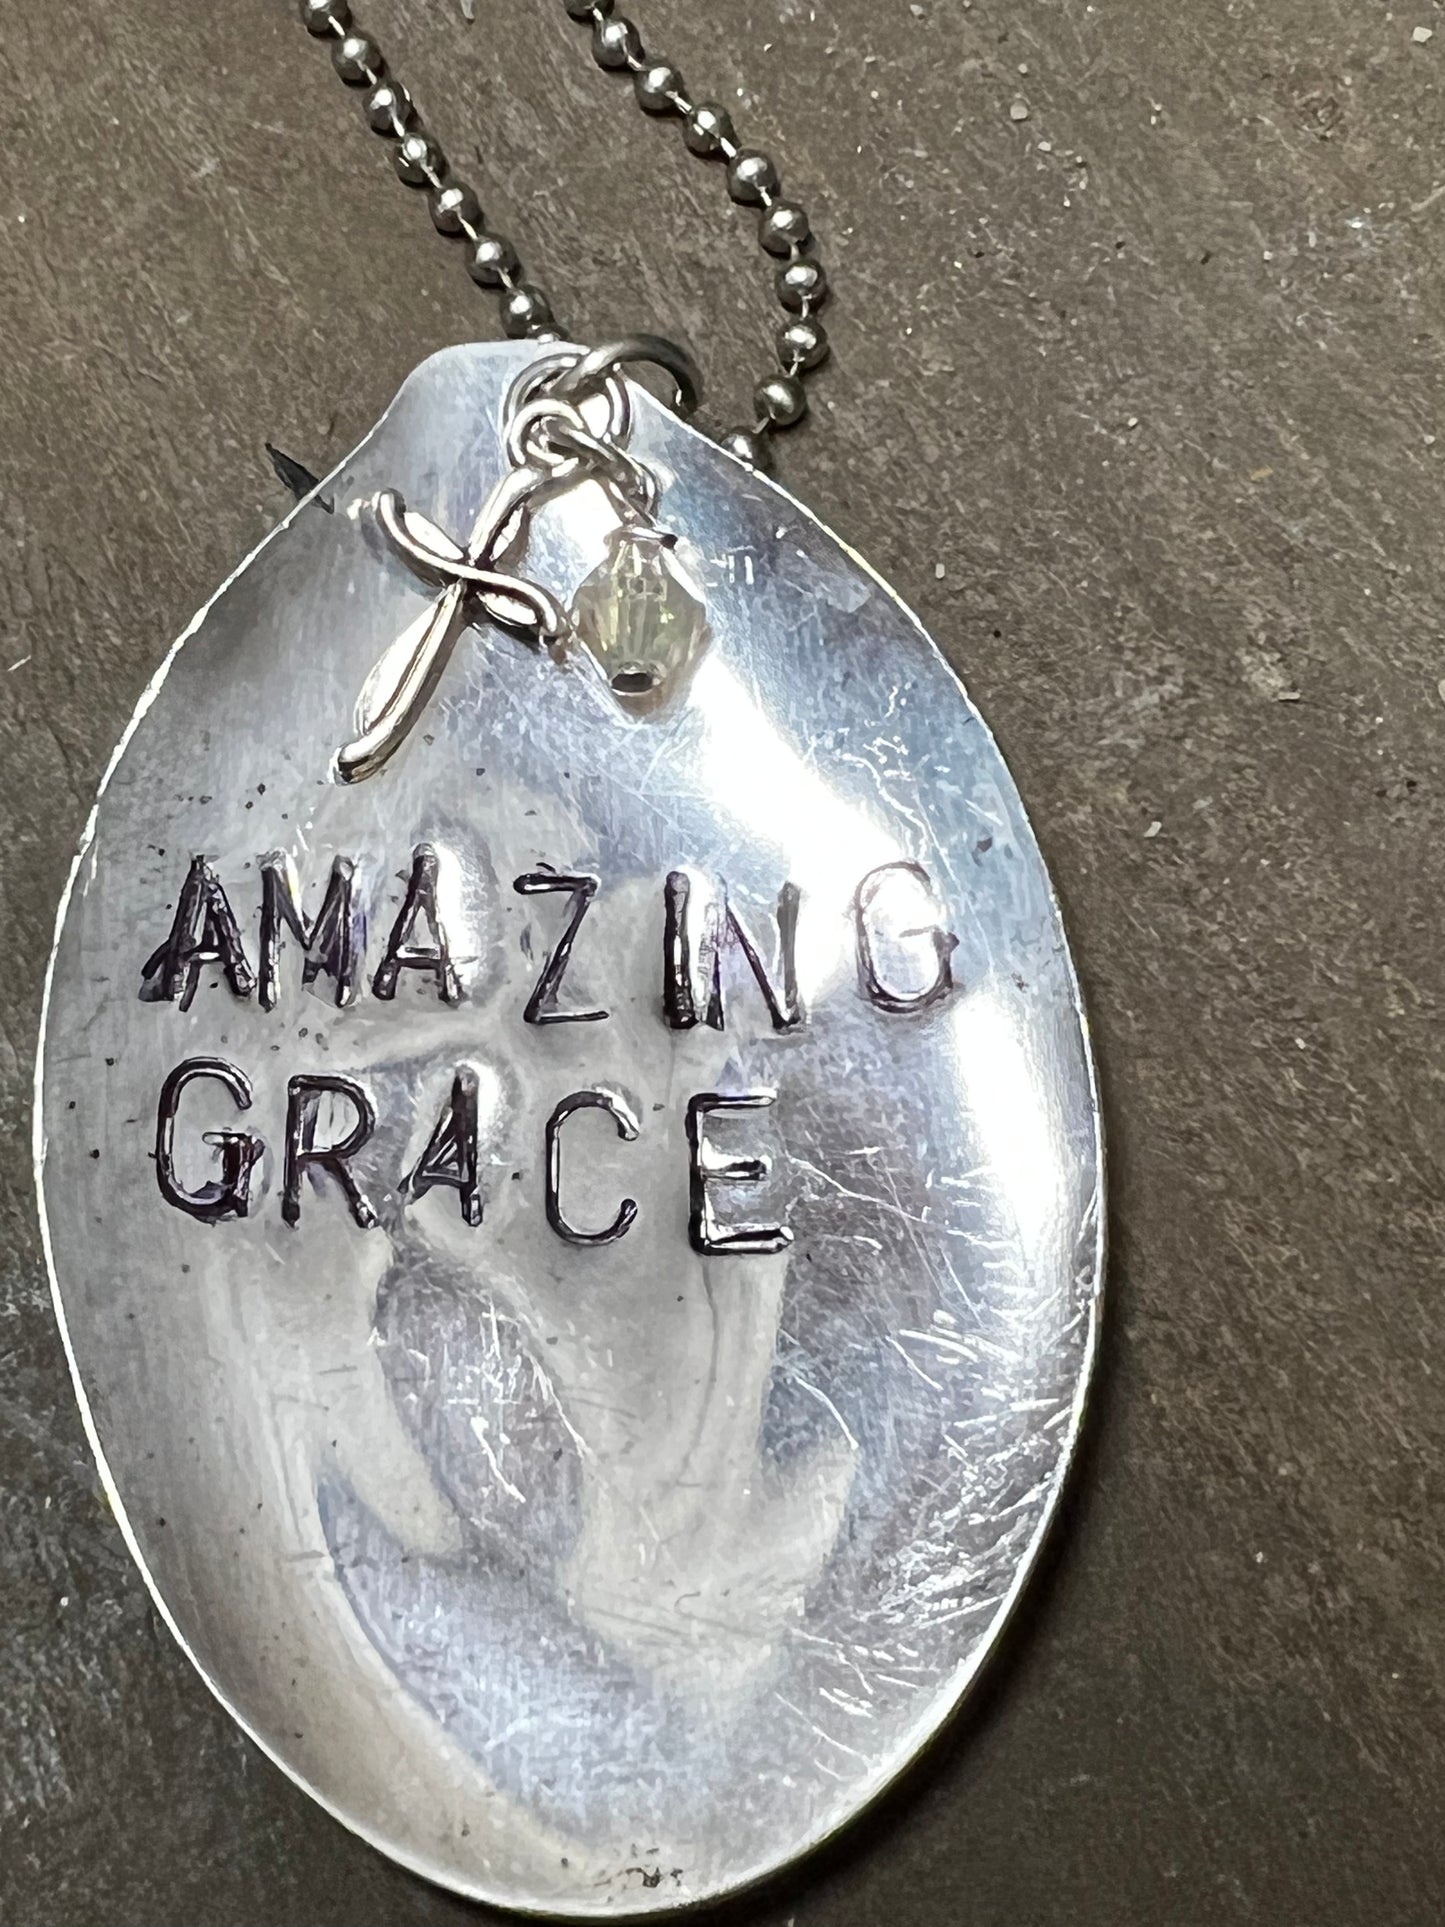 Necklace, Ball Chain W/Charms, AMAZING GRACE